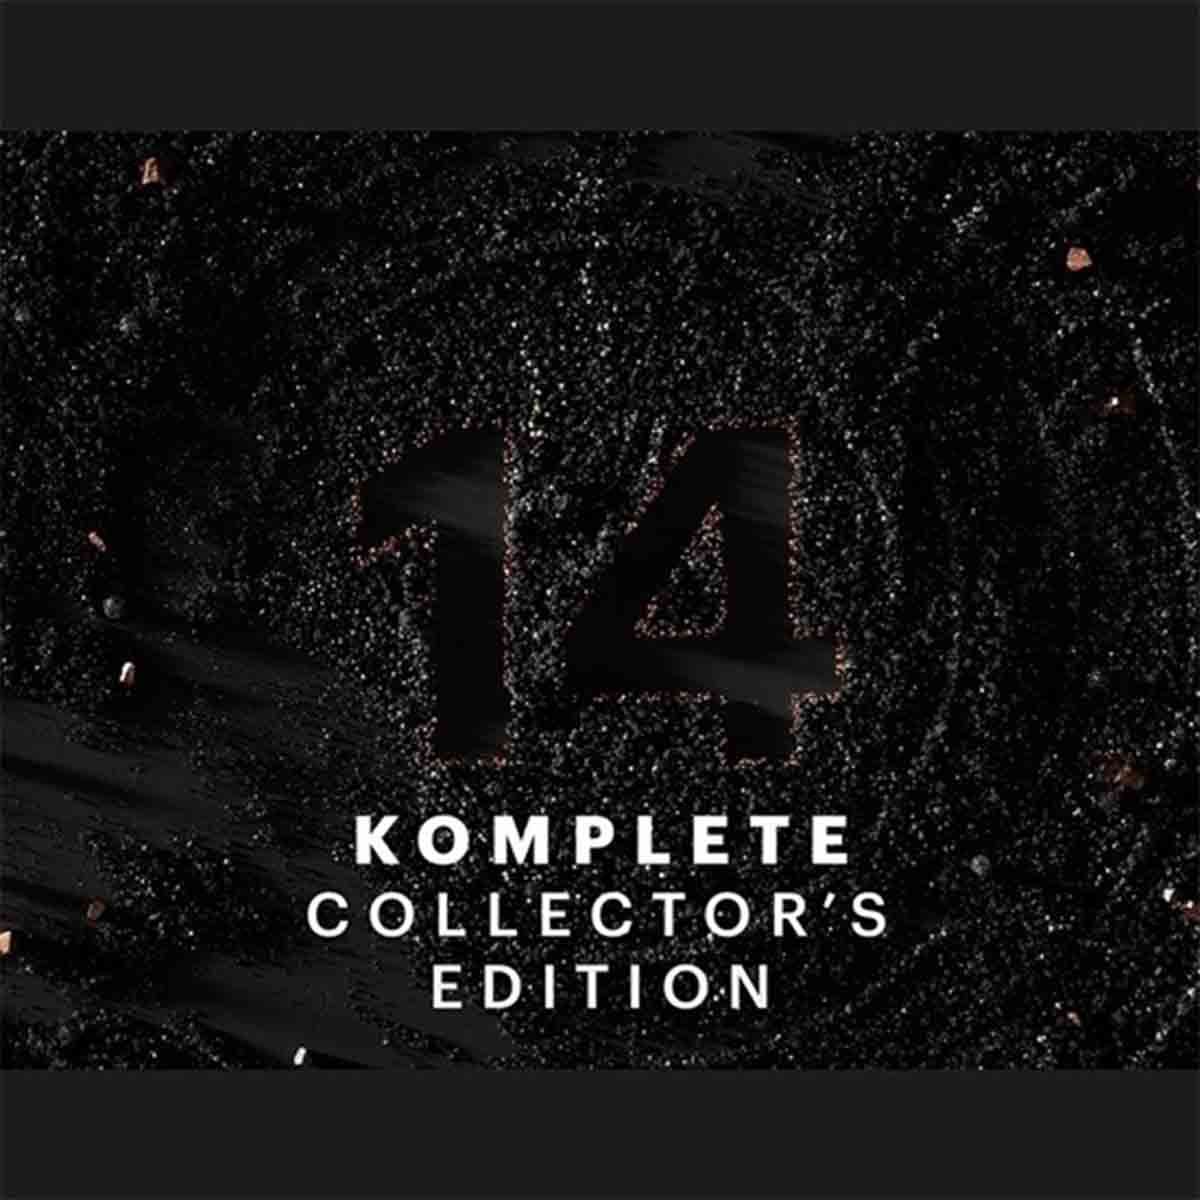 Native Instruments NI Komplete 14 Ultimate Collector's Edition Upgrade (from Komplete 8-14) - DOWNLOAD CODE